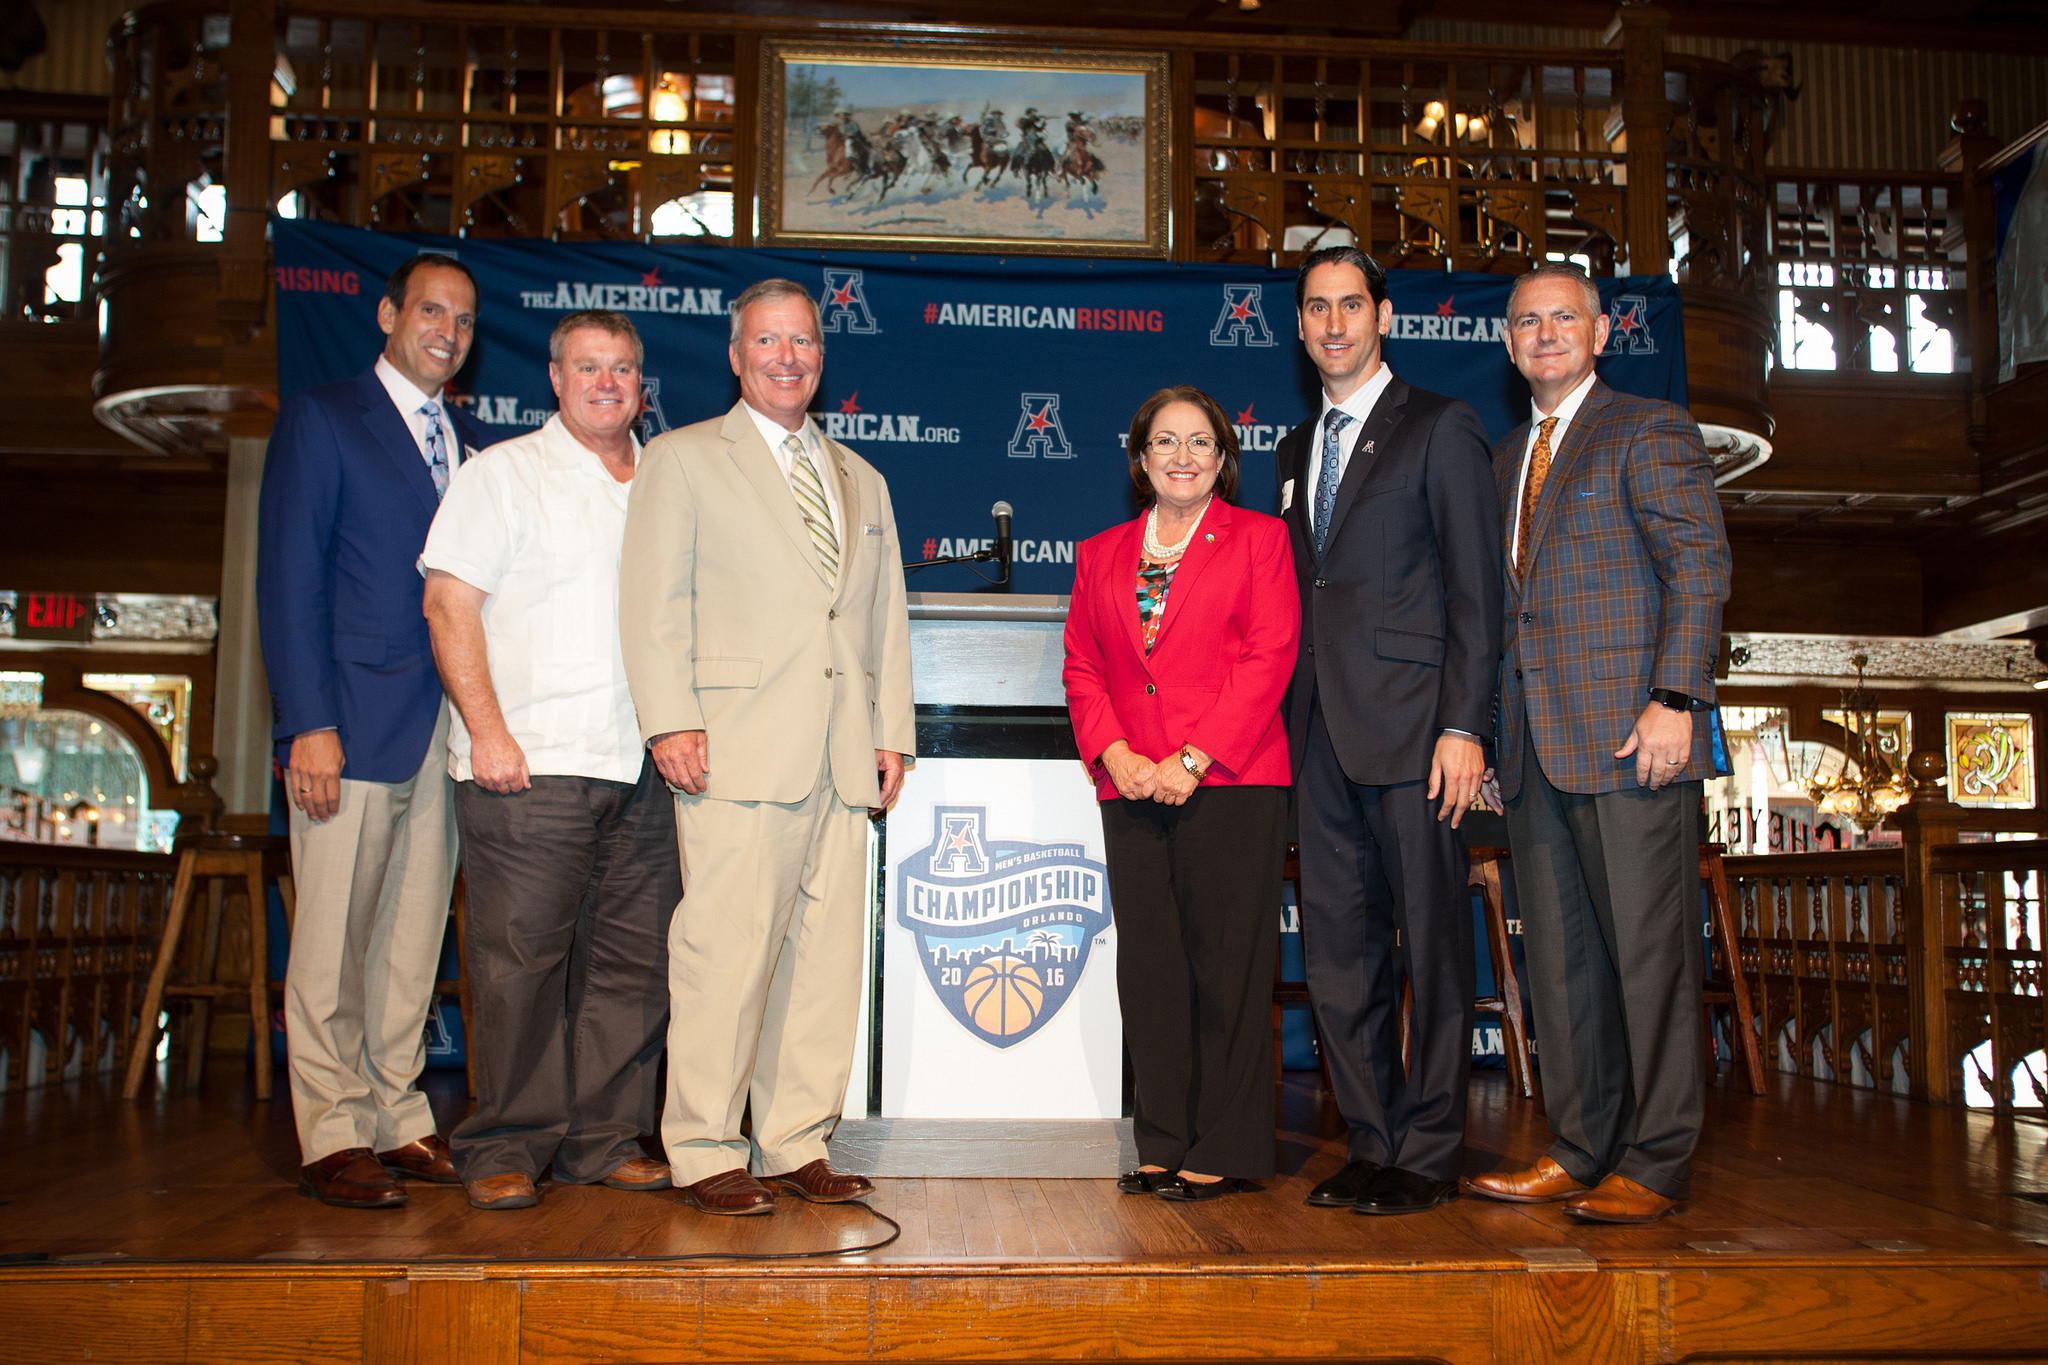 Mayor Jacobs and Mayor Dyer with new organizing committee for men's basketball